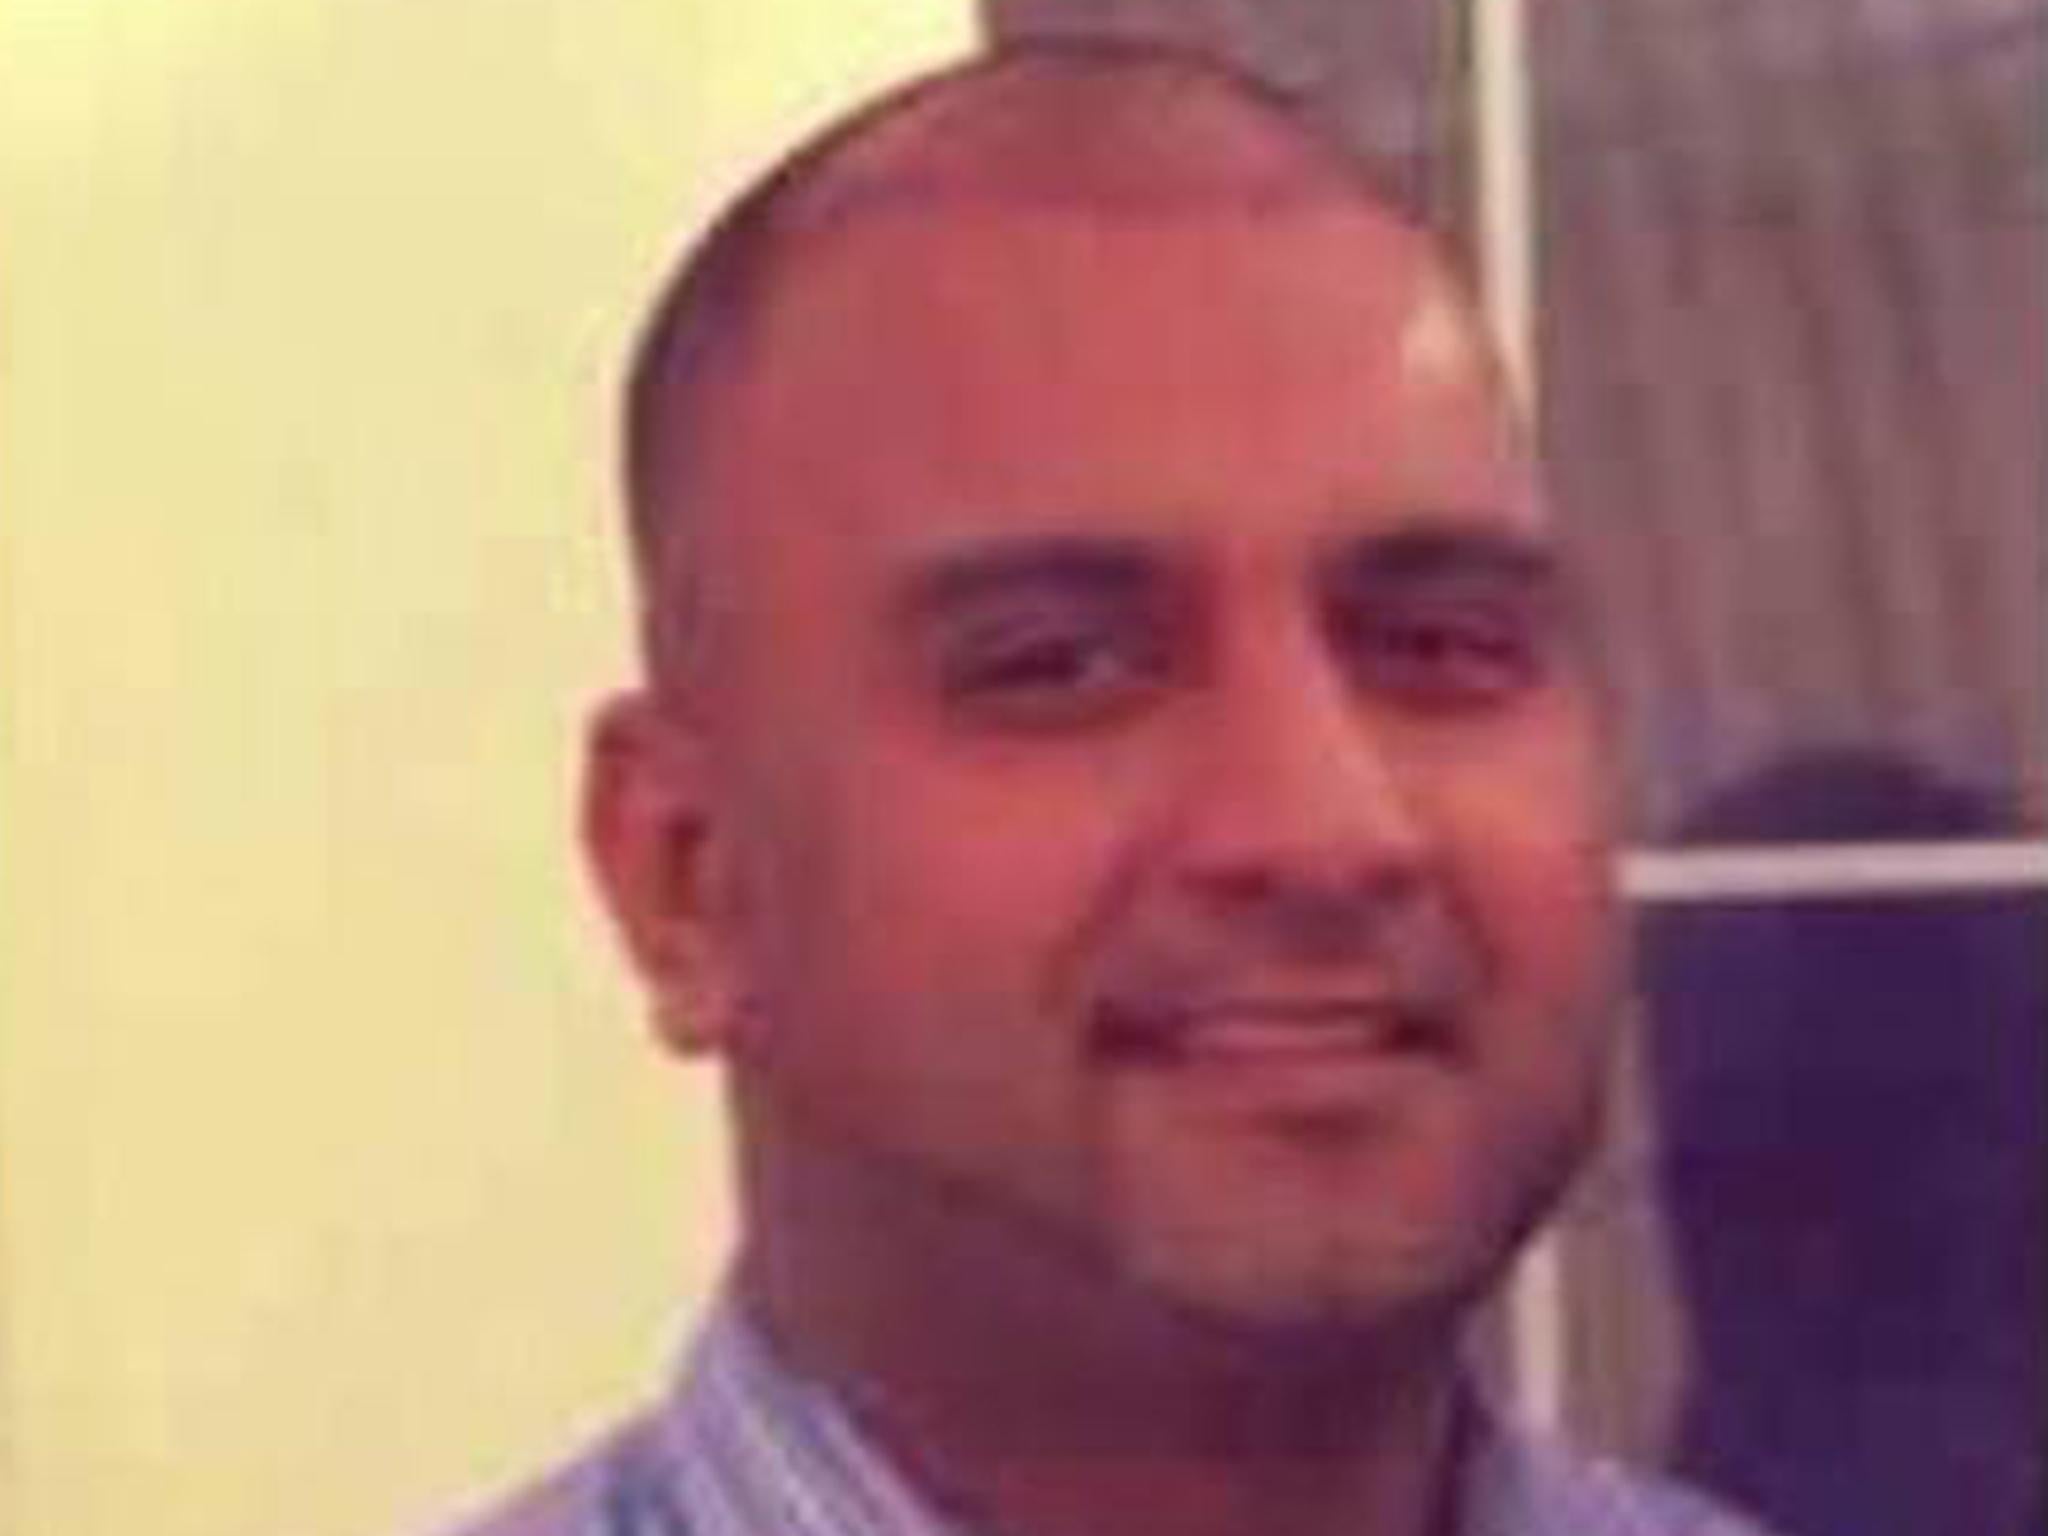 Mazhar Ali, 41, from Stockton, Teesside, died in hospital on Christmas Day after being stabbed inside the Manjaros restaurant on Linthorpe Road, Middlesbrough